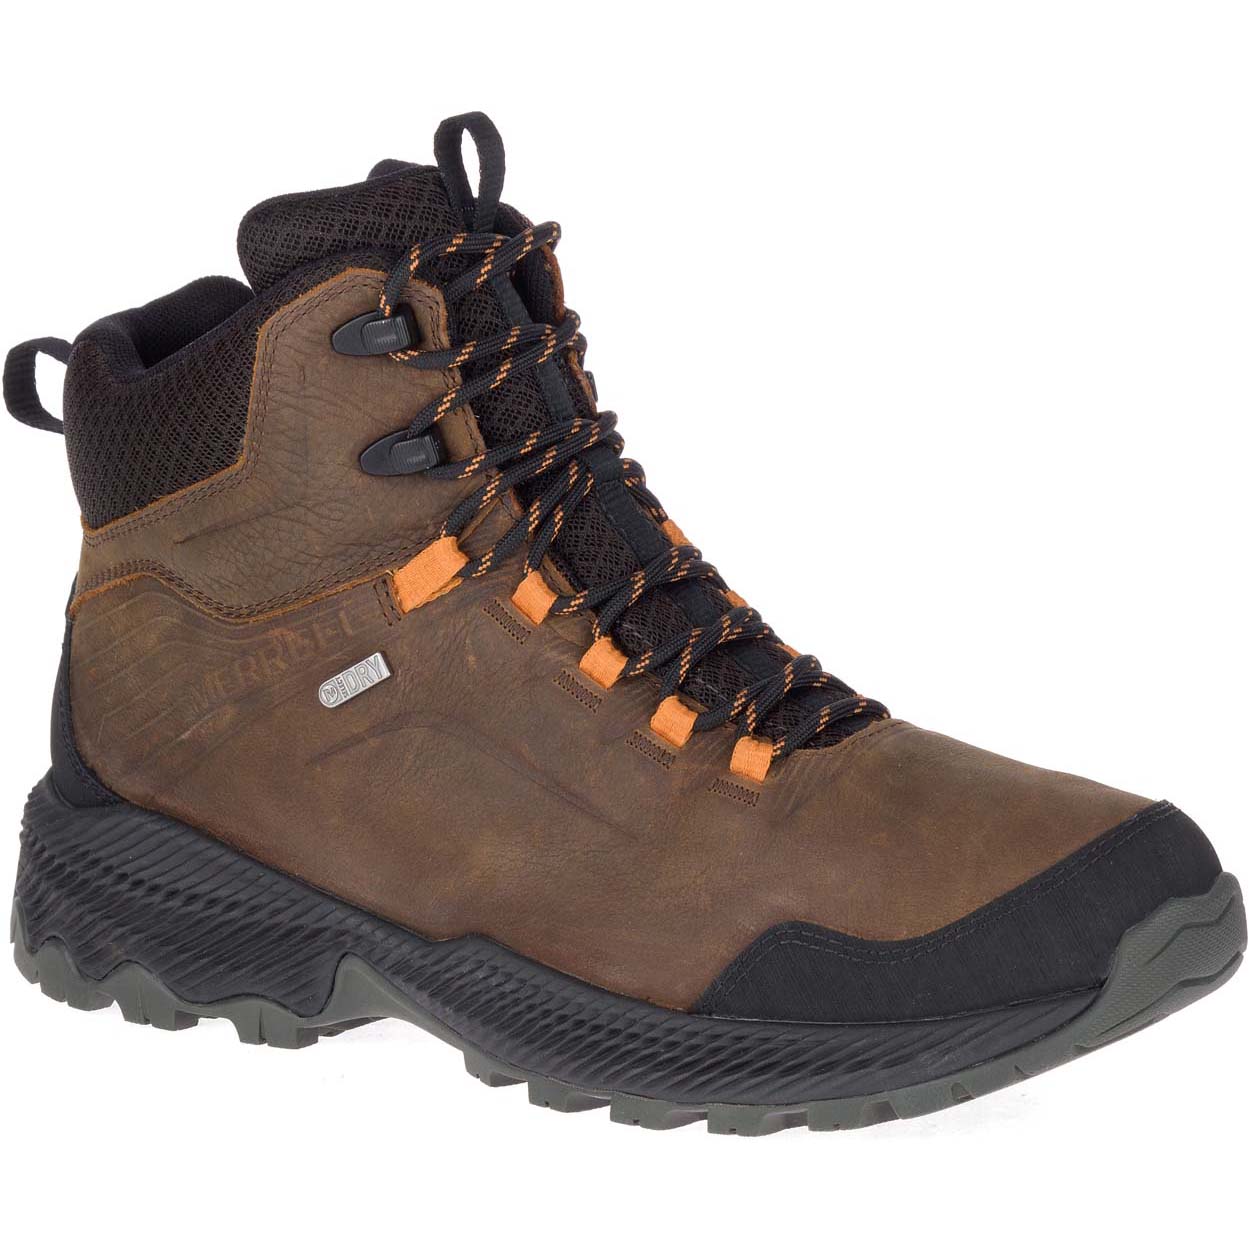 MERRELL - FORESTBOUND MID WP - HIKING BOOT - DARK EARTH